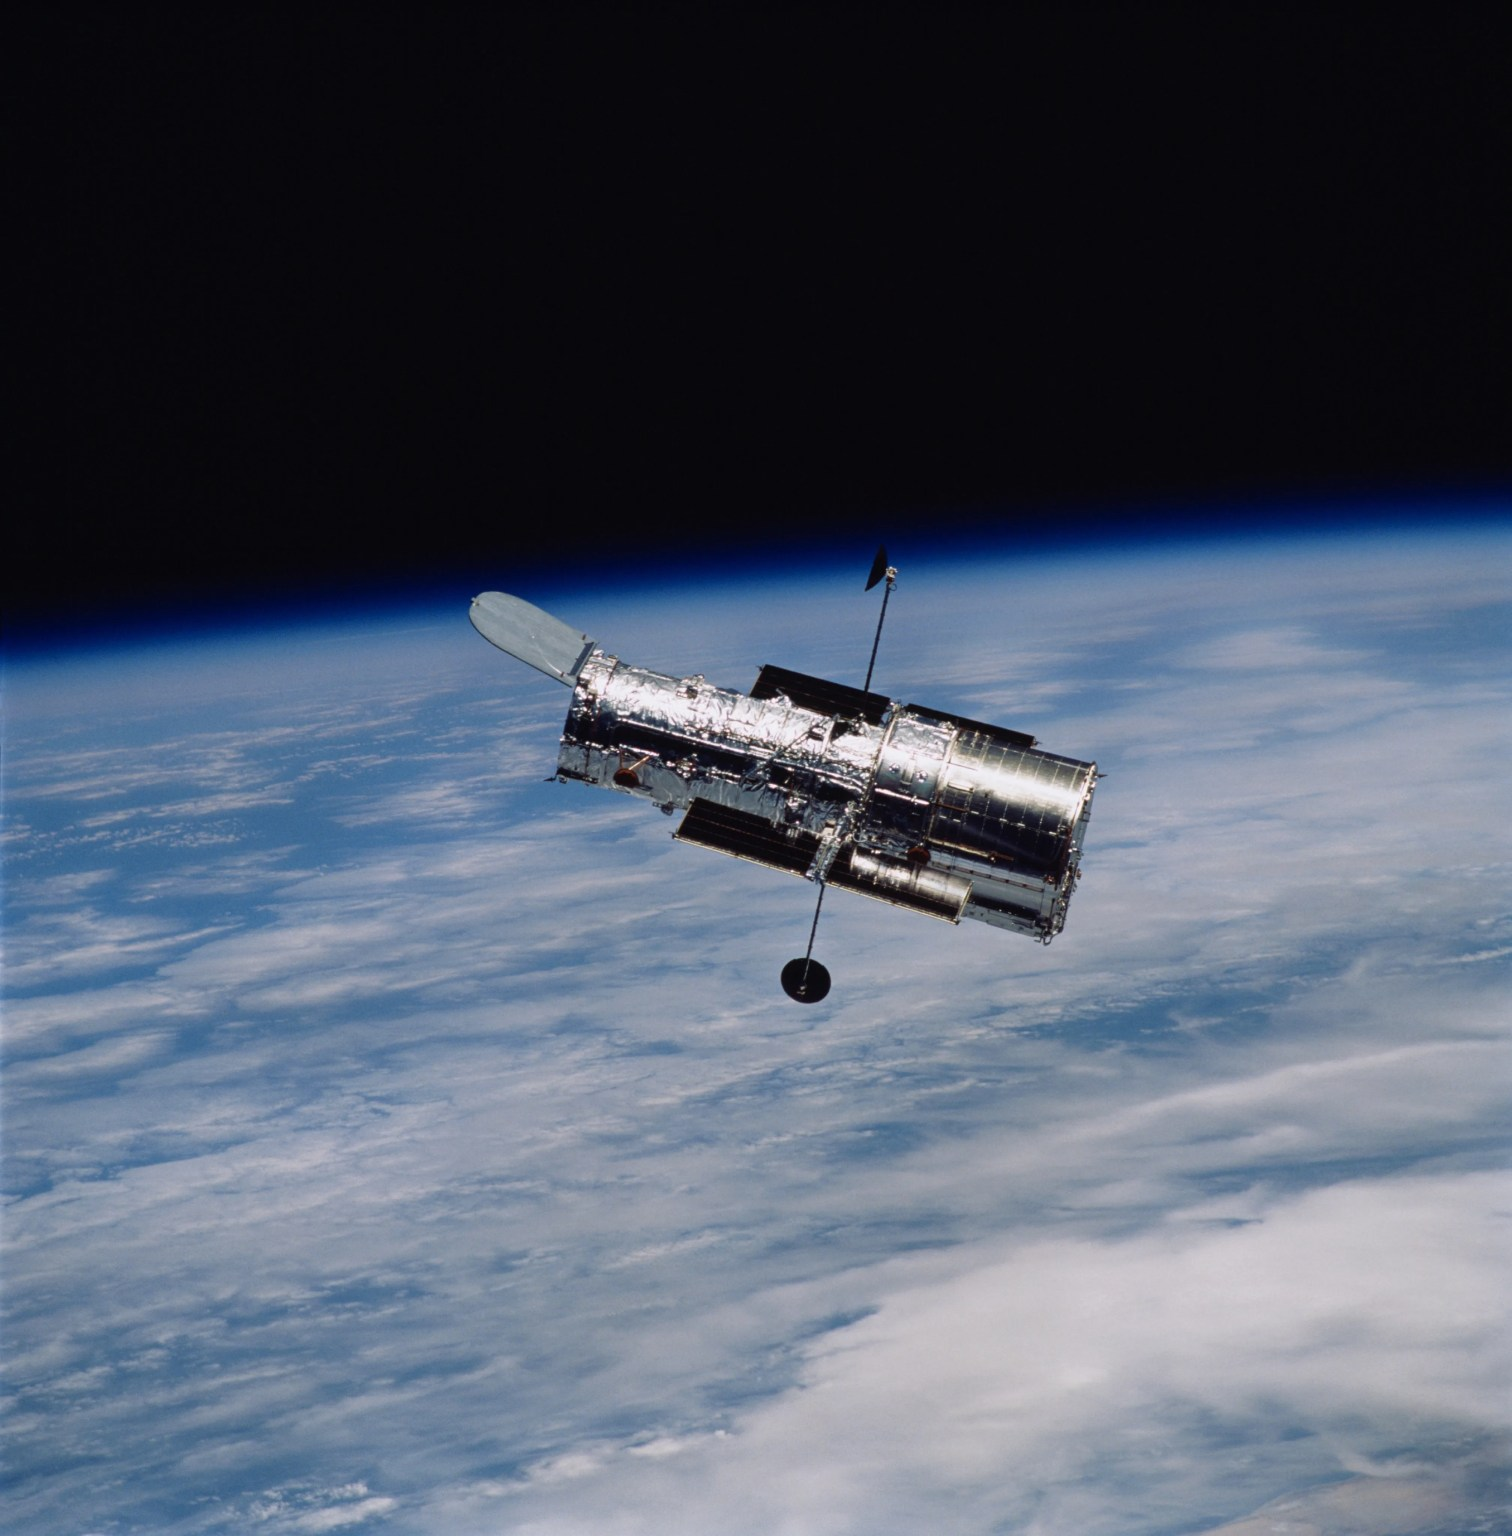 Hubble floating above Earth